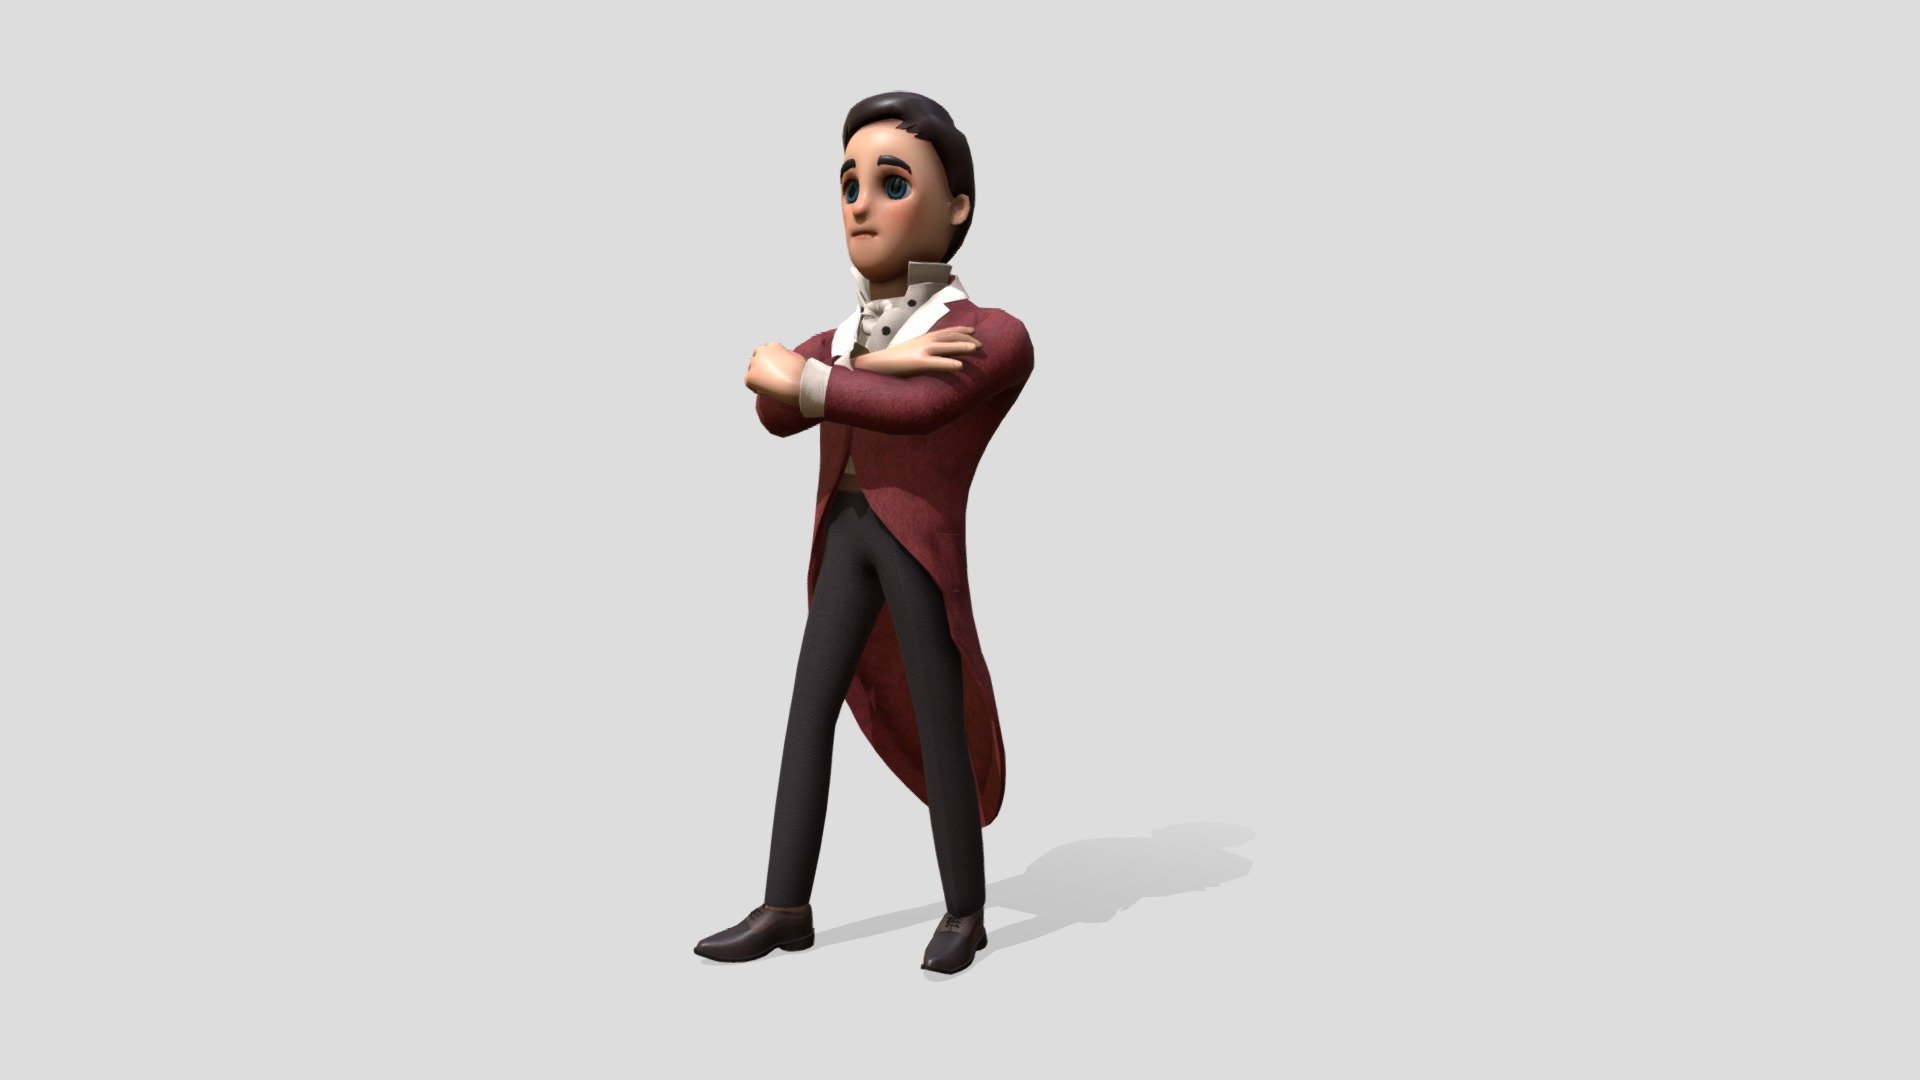 Stylised animated character of Sir Stamford Raffles. 
Animations included: Walking (Loop), Running (Loop), Waving (Loop), Idle (Loop), Talking (Loop), Pointing, Gesturing

Login to STB’s Tourism Information &amp; Services Hub for free downloads:
https://tih.stb.gov.sg/content/tih/en/marketing-and-media-assets/digital-images-andvideoslisting/digital-images-and-videos-detail.1046f65c6b65c584f98a26c8c08bdf58bcf.Sir+Stamford+Raffles.html - Sir Stamford Raffles - 3D model by STB-TC 3d model